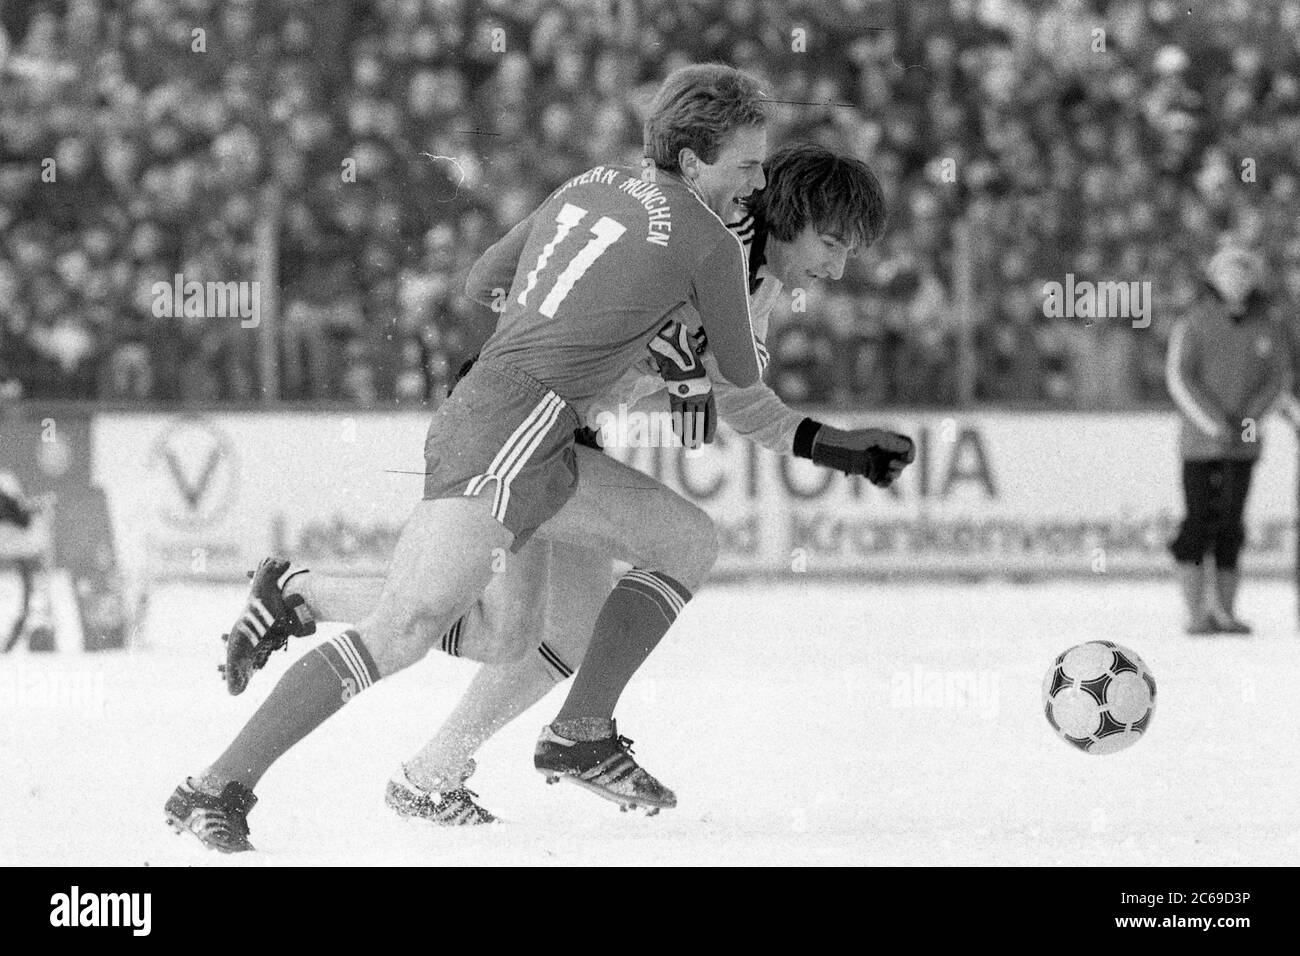 Karl-Heinz RUMMENIGGE (M, front left) tries to stop a player from the game association; Soccer DFB Pokal SpVgg Bayreuth (BT) - FC Bayern Munich (M) 1-0, on 12.01.1980 in Bayreuth/Germany. | usage worldwide Stock Photo